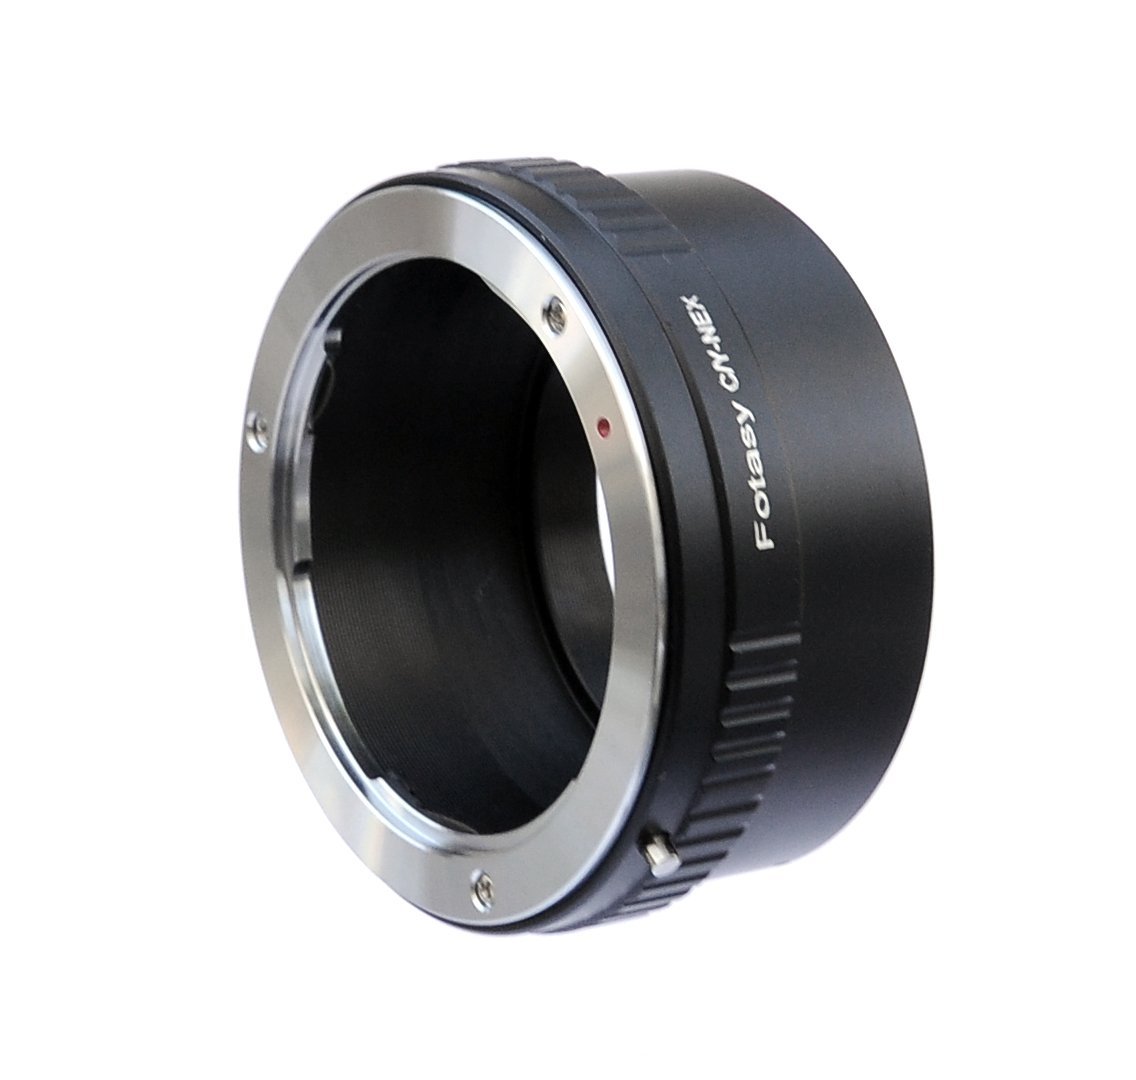 Vbestlife CY-NEX Manual Lens Mount Adapter Ring Lens Converter for Contax Lens to Sony NEX Mirrorless Camera.